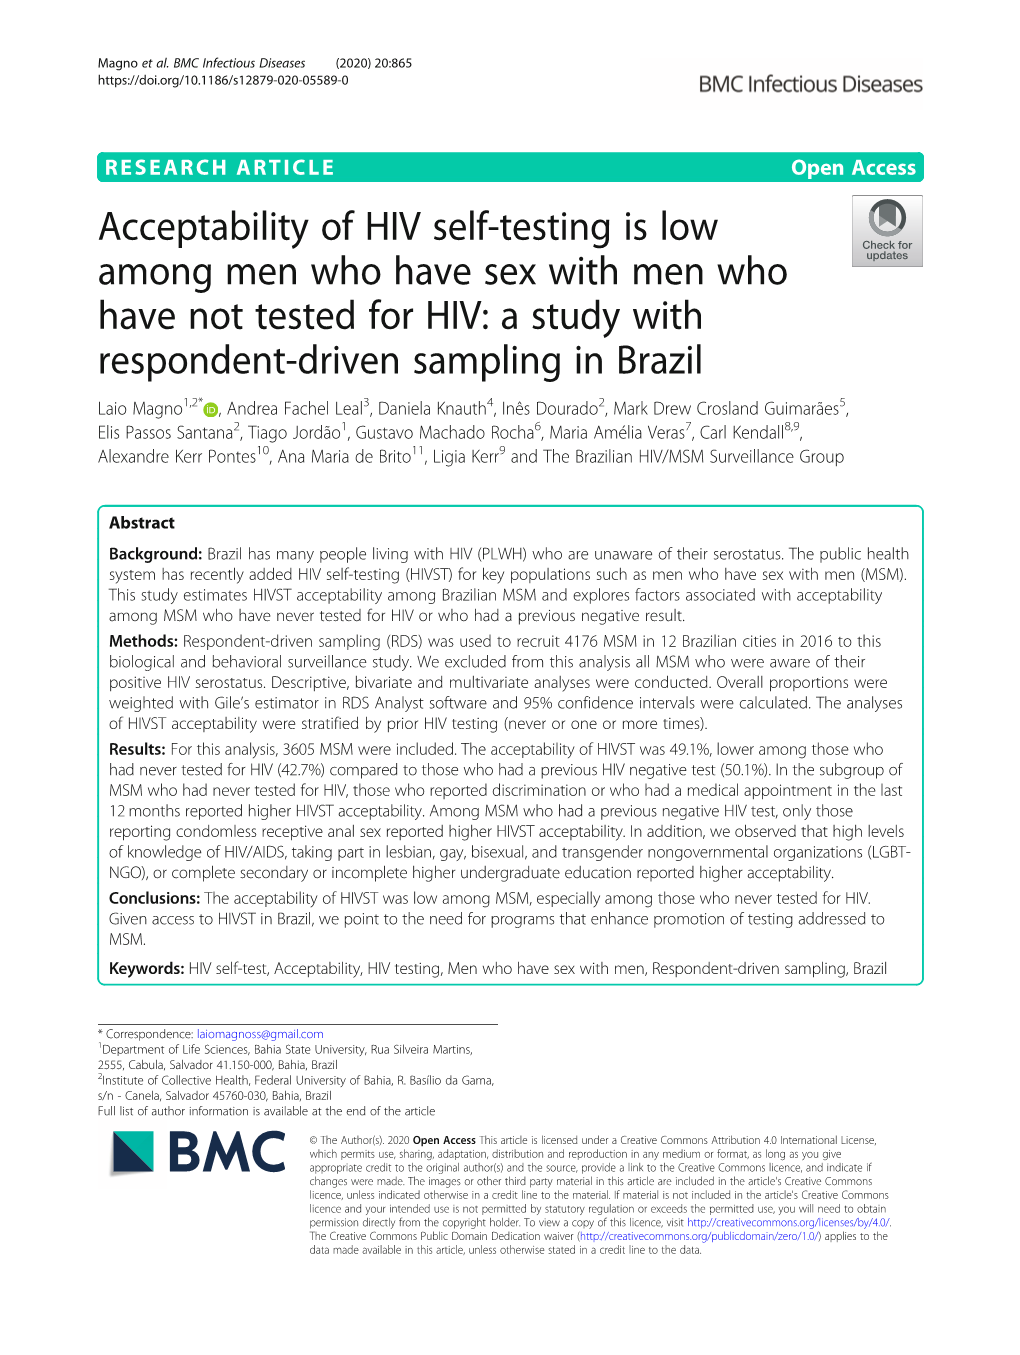 Acceptability of HIV Self-Testing Is Low Among Men Who Have Sex with Men